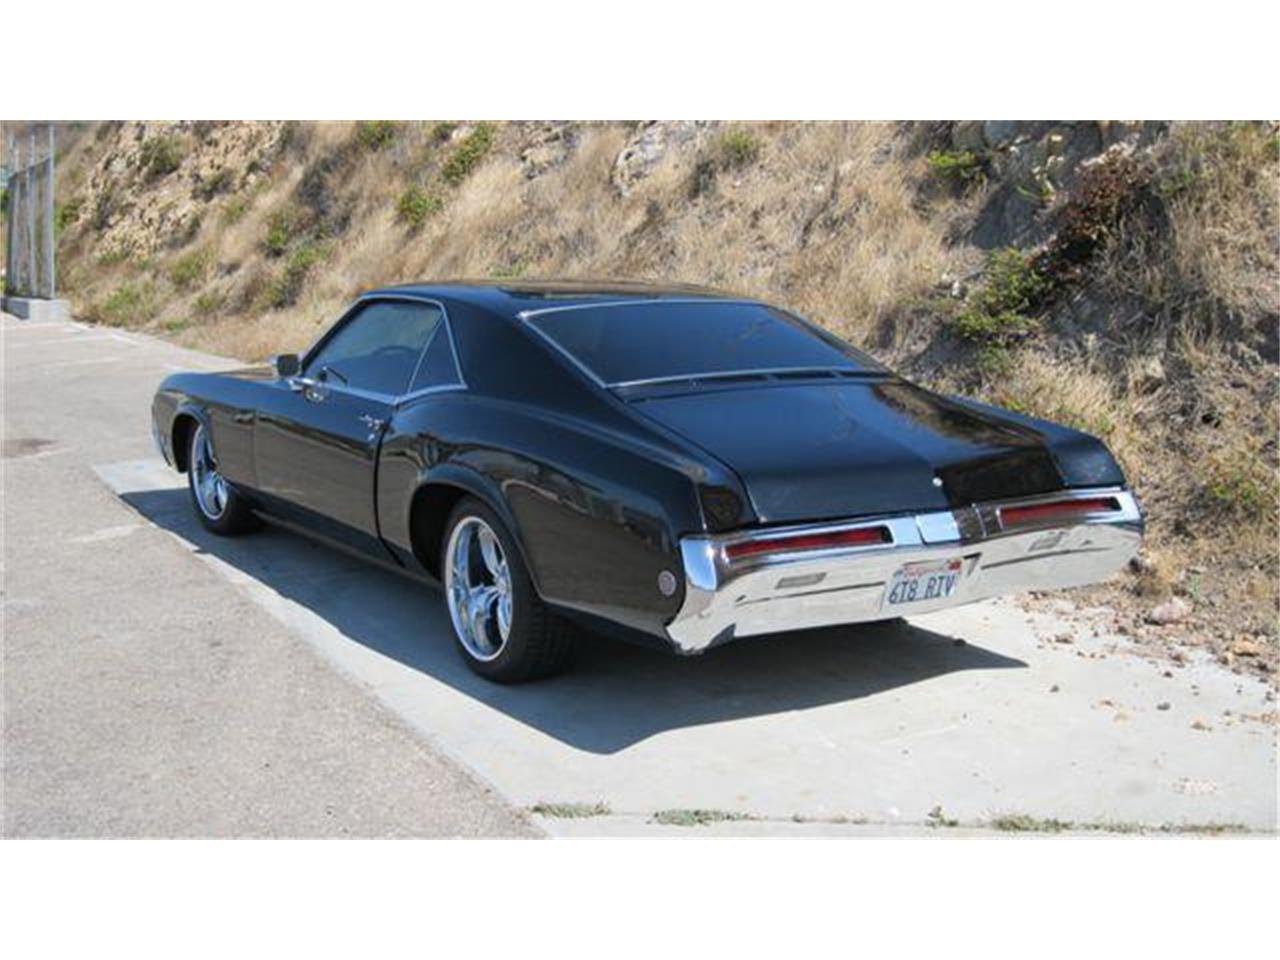 1968 buick riviera for sale classiccars com cc 1158046 1968 buick riviera for sale